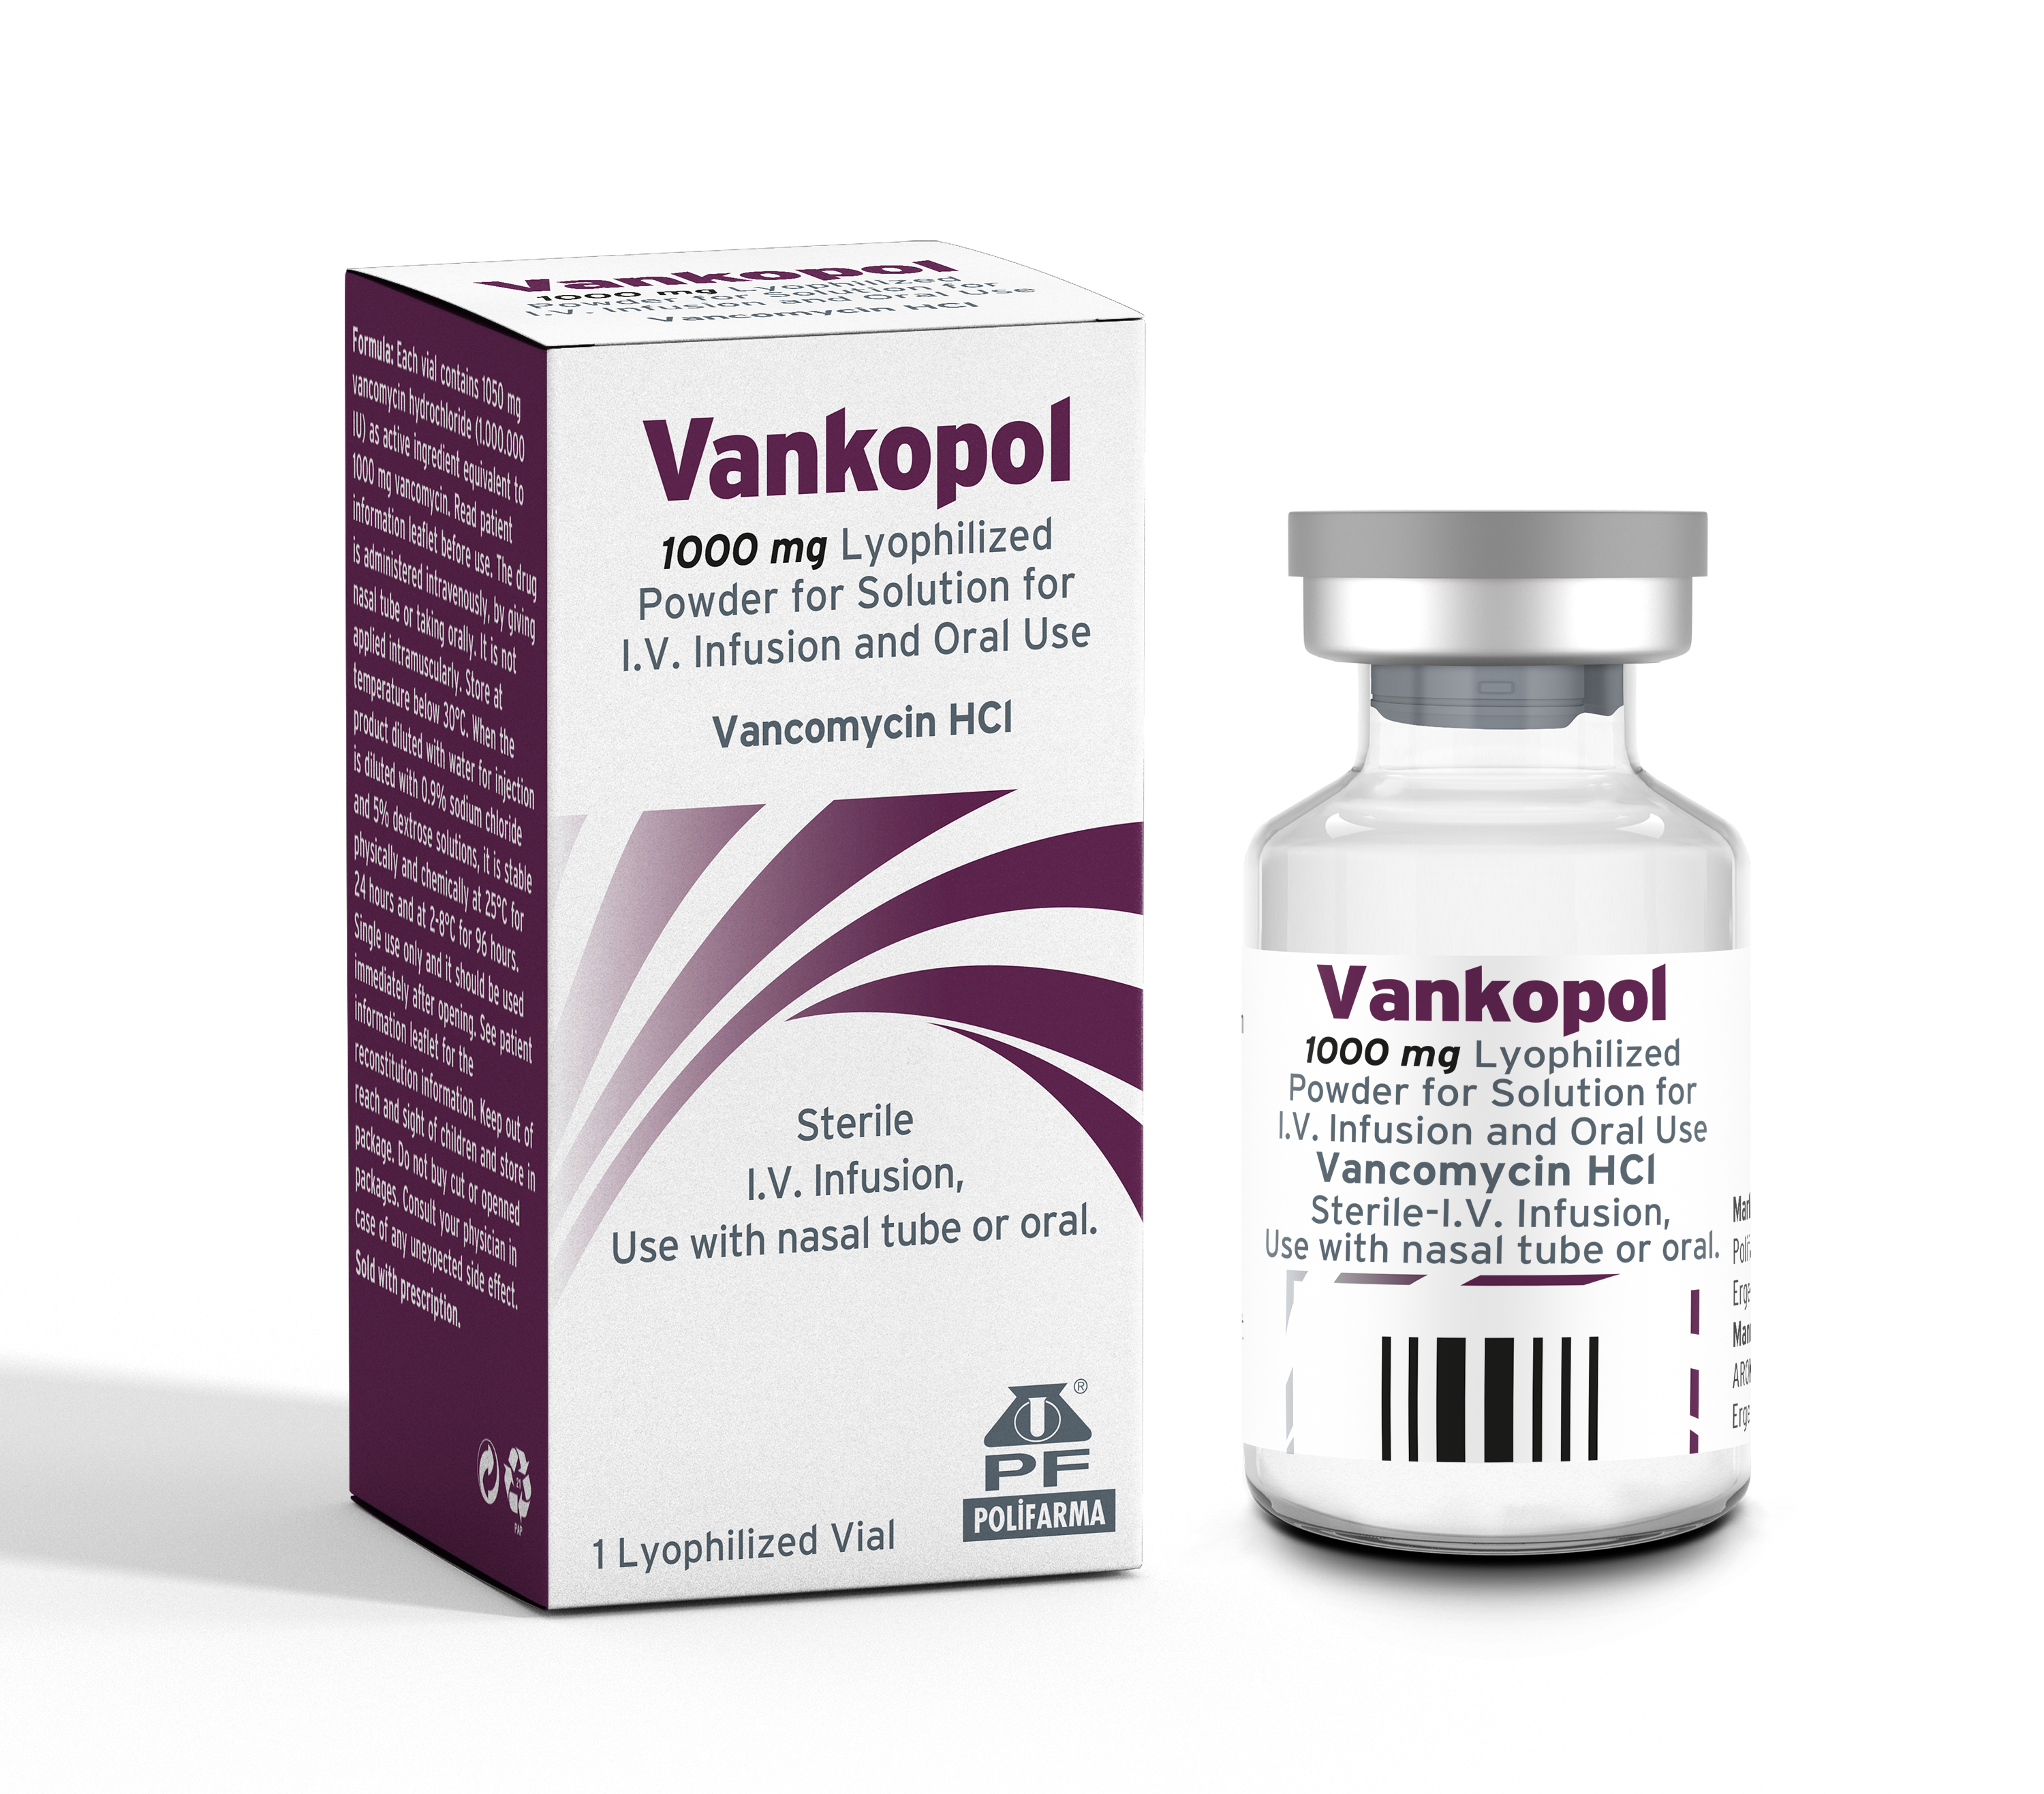 VANKOPOL 1000 mg IV Lyophilized powder for infusion and oral solution preparation - 1 vial